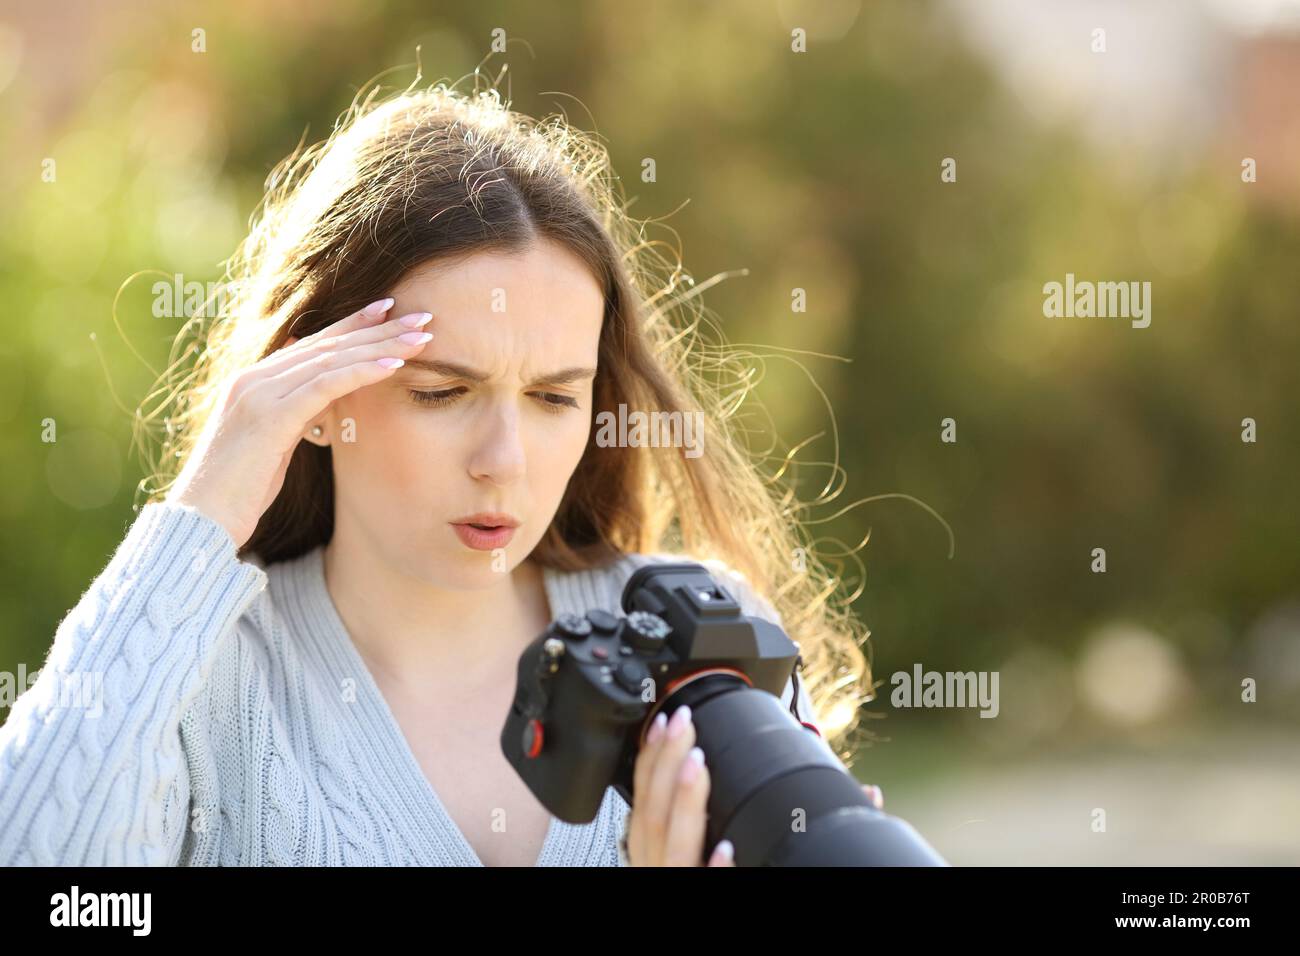 Worried photographer checking bad photos on mirrorless camera in a park Stock Photo